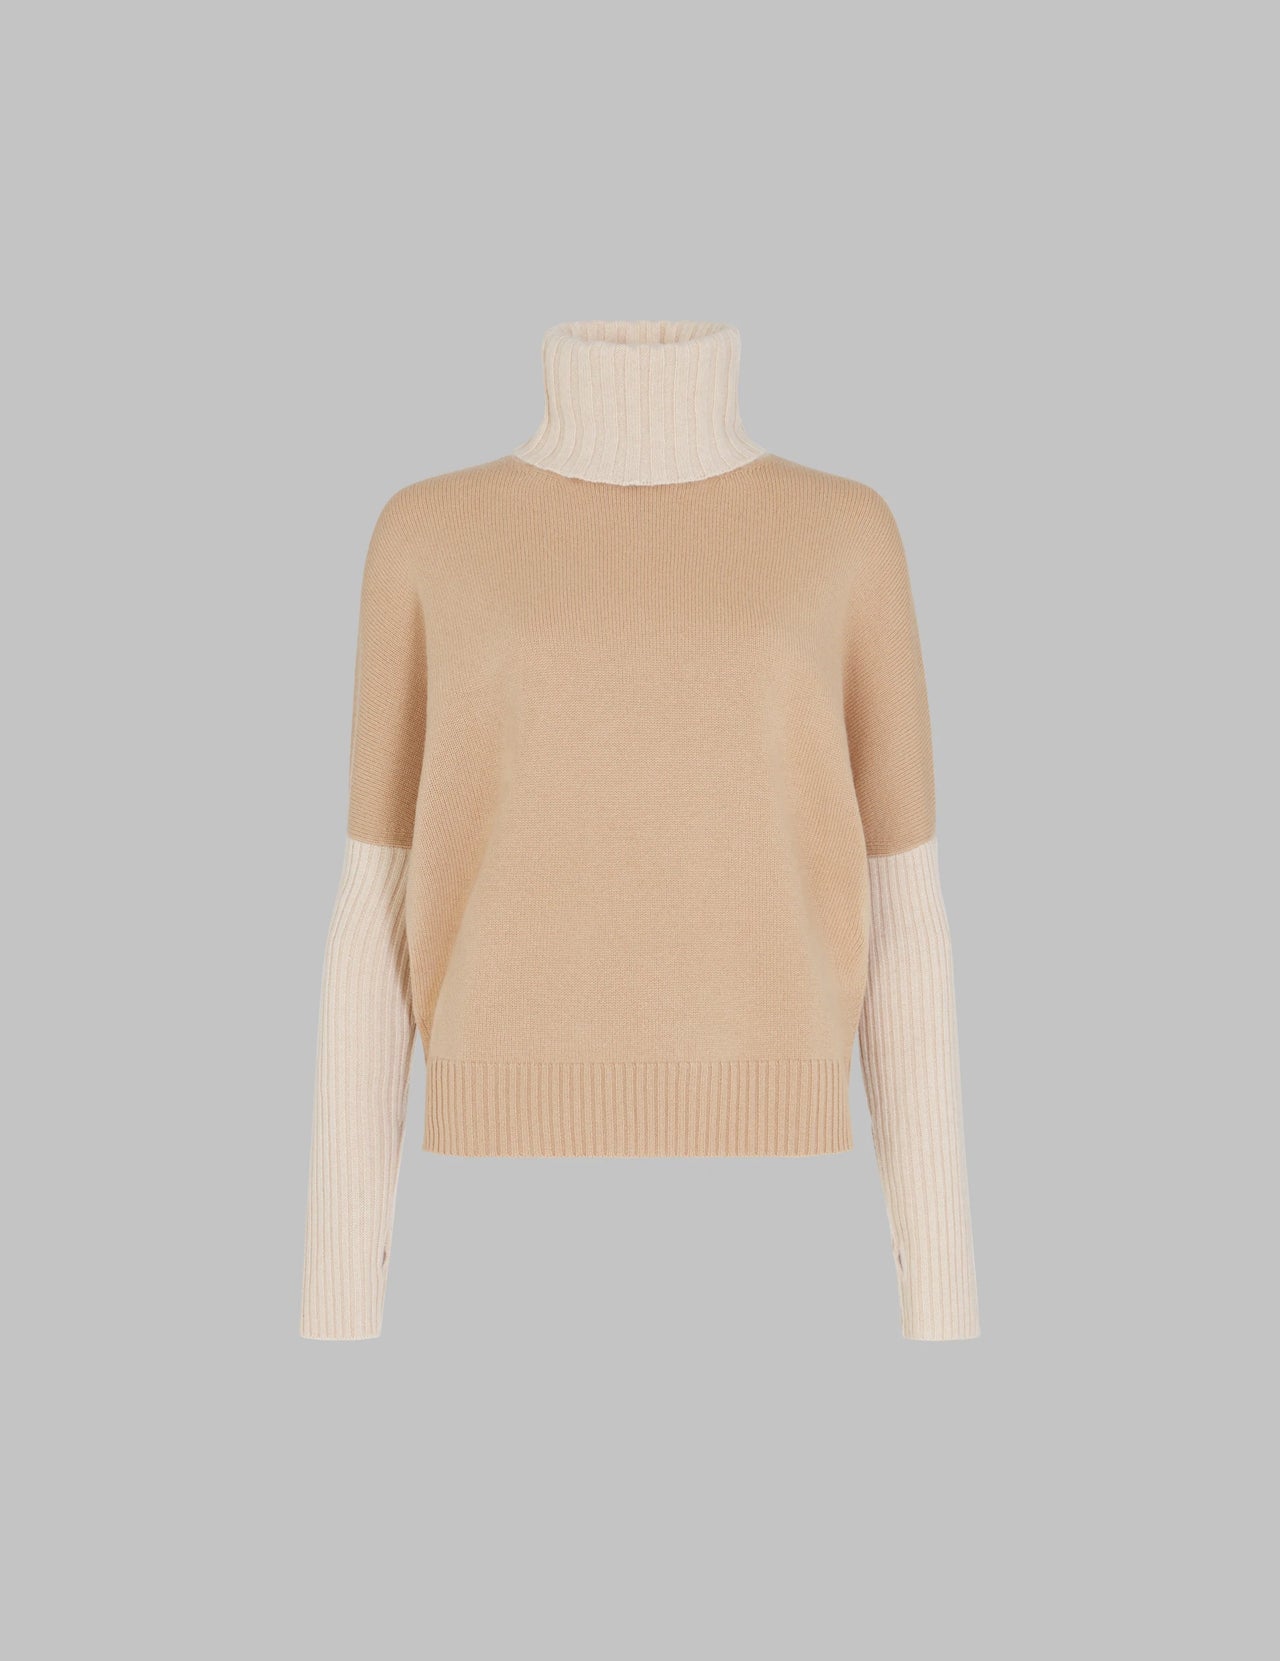  Honey Contrast Roll Neck Cashmere Sweater 